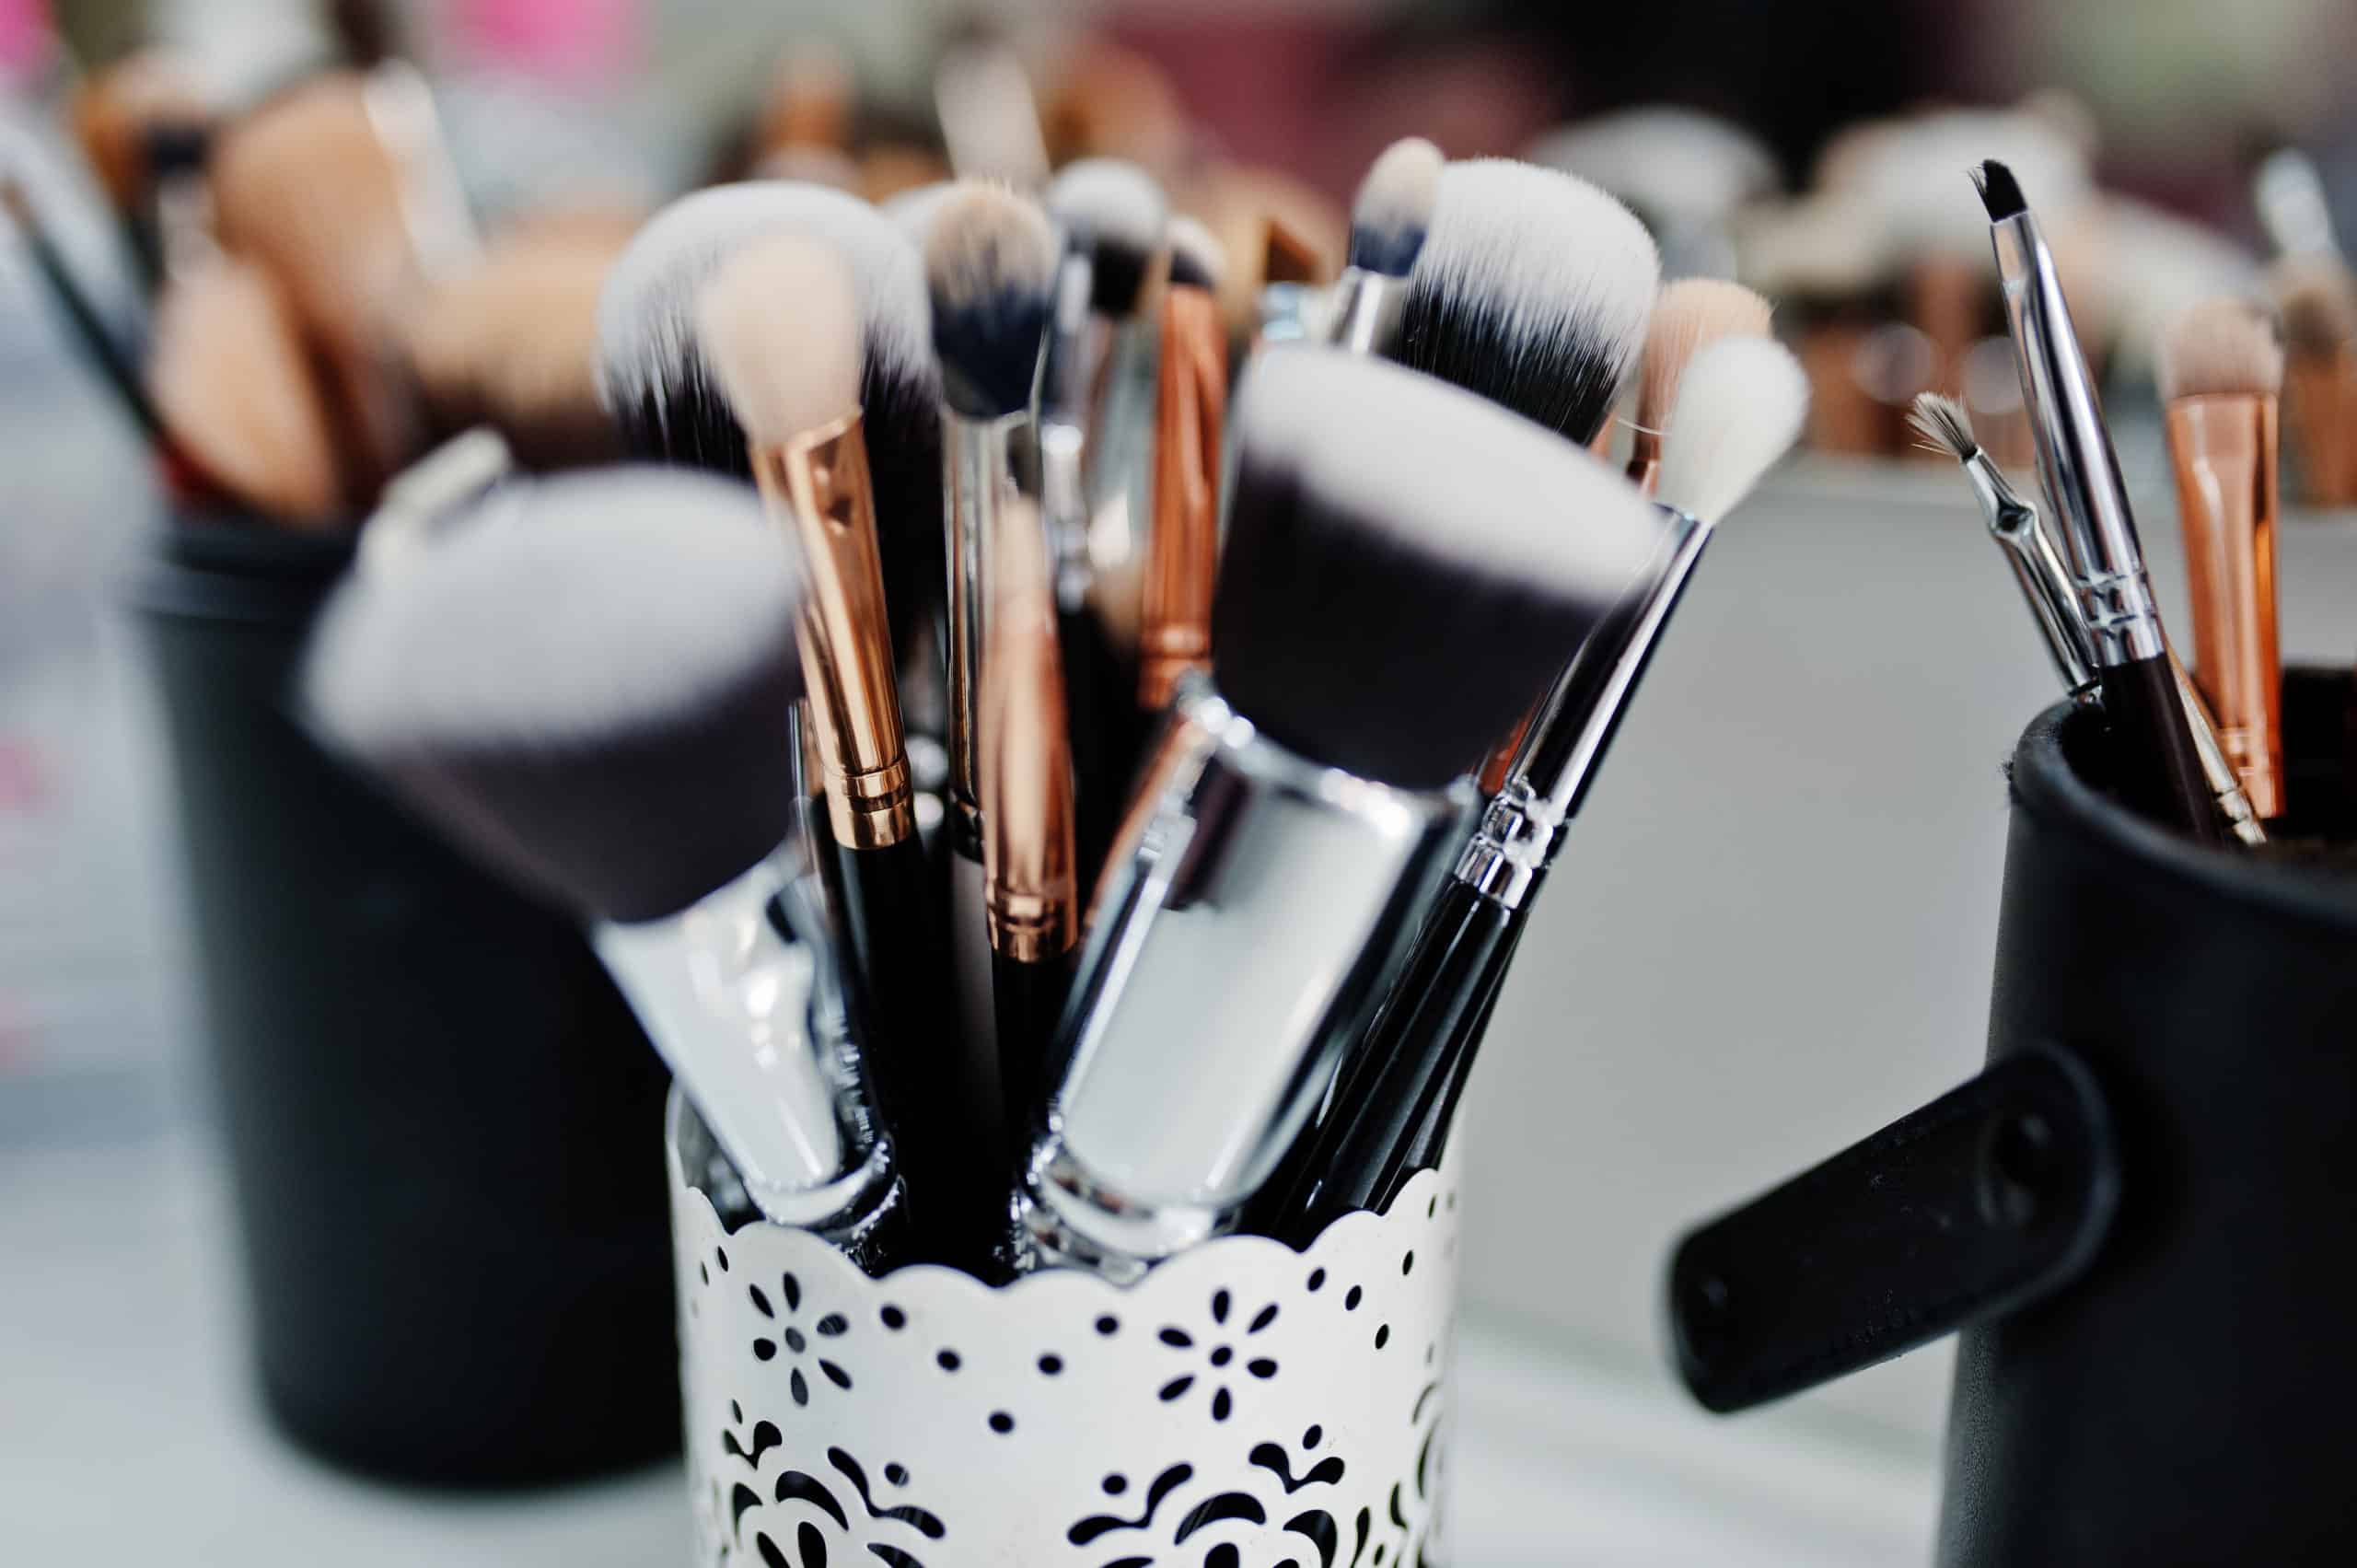 Many brushes on a table in the salon. Workplace makeup artist. Set of brushes for makeup.